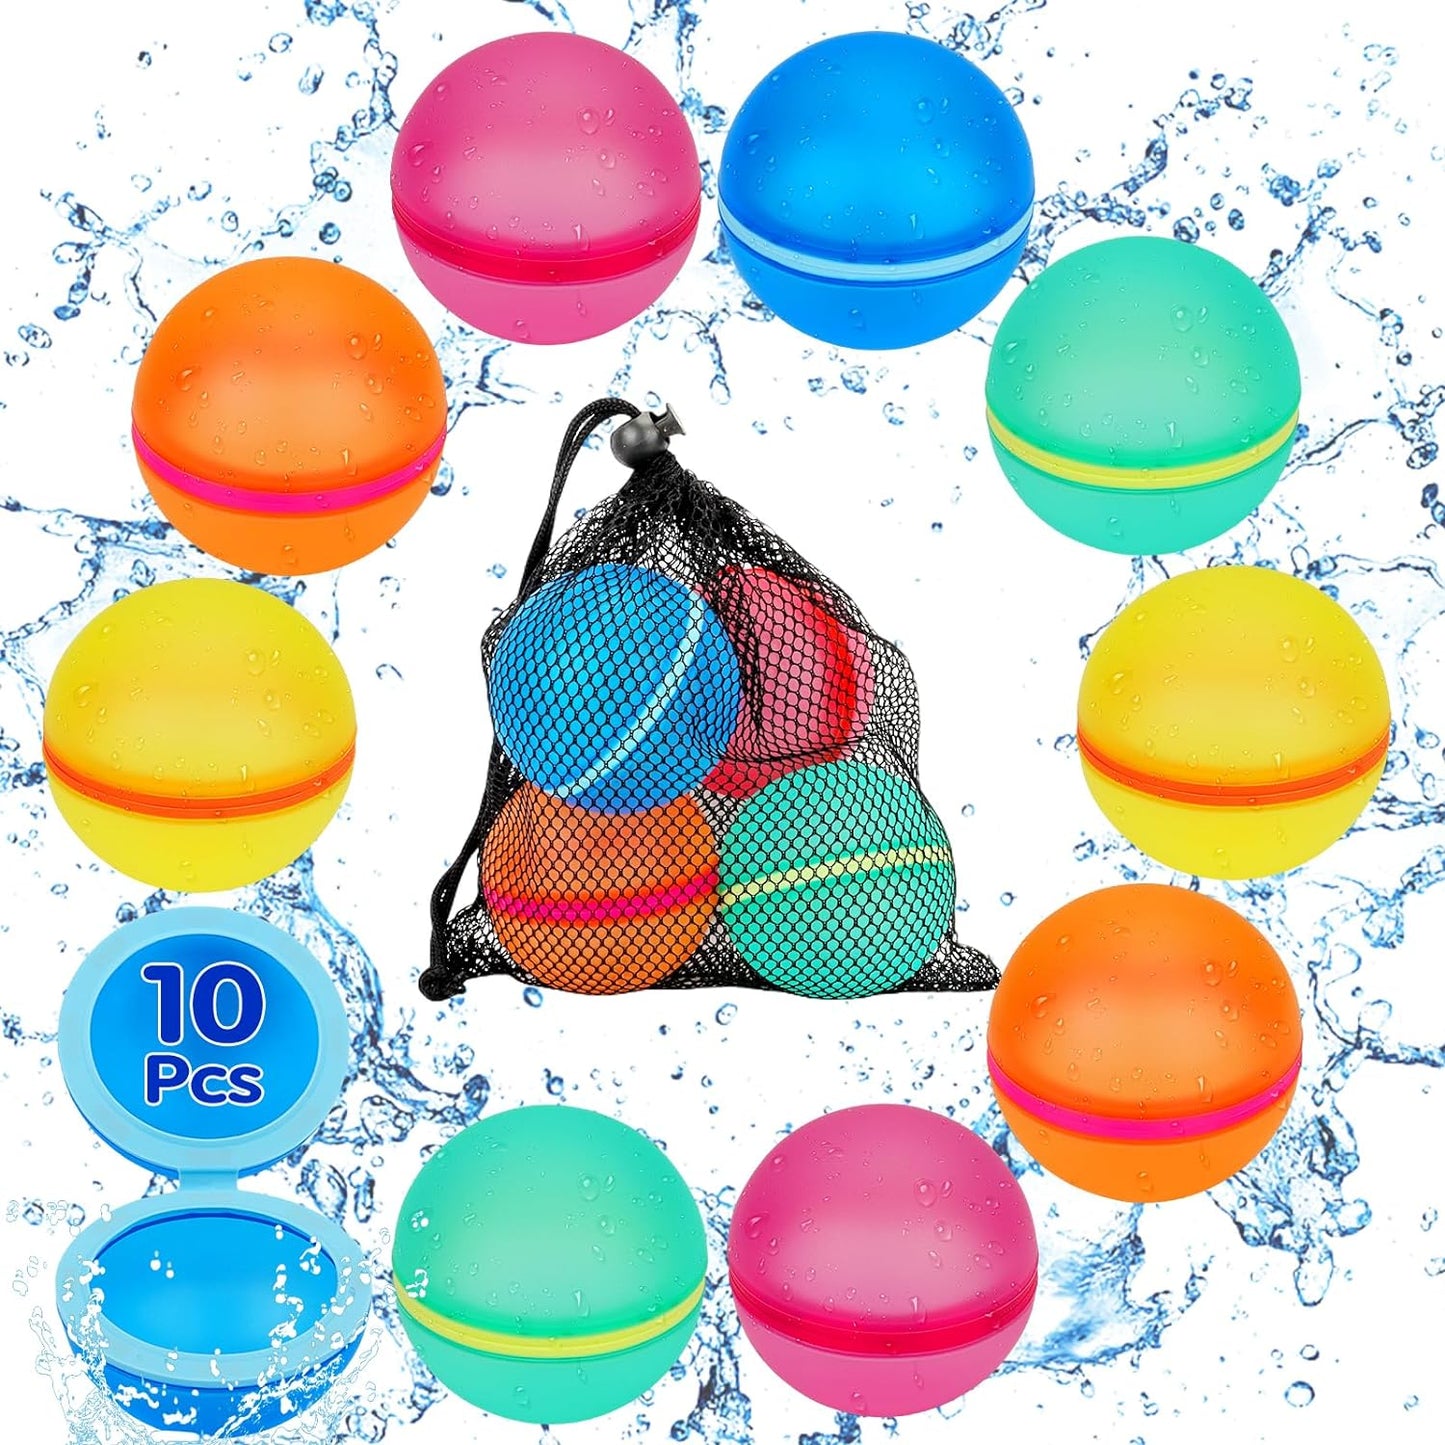 Magnetic Reusable Water Balloons for Kids: 12 PCS Self Sealing Refillable Water Balloons Quick Fill Beach Toys for Toddlers Outdoor Pool Summer Bath Toys for Kids Ages 3-12 Water Balls for Boys Girls